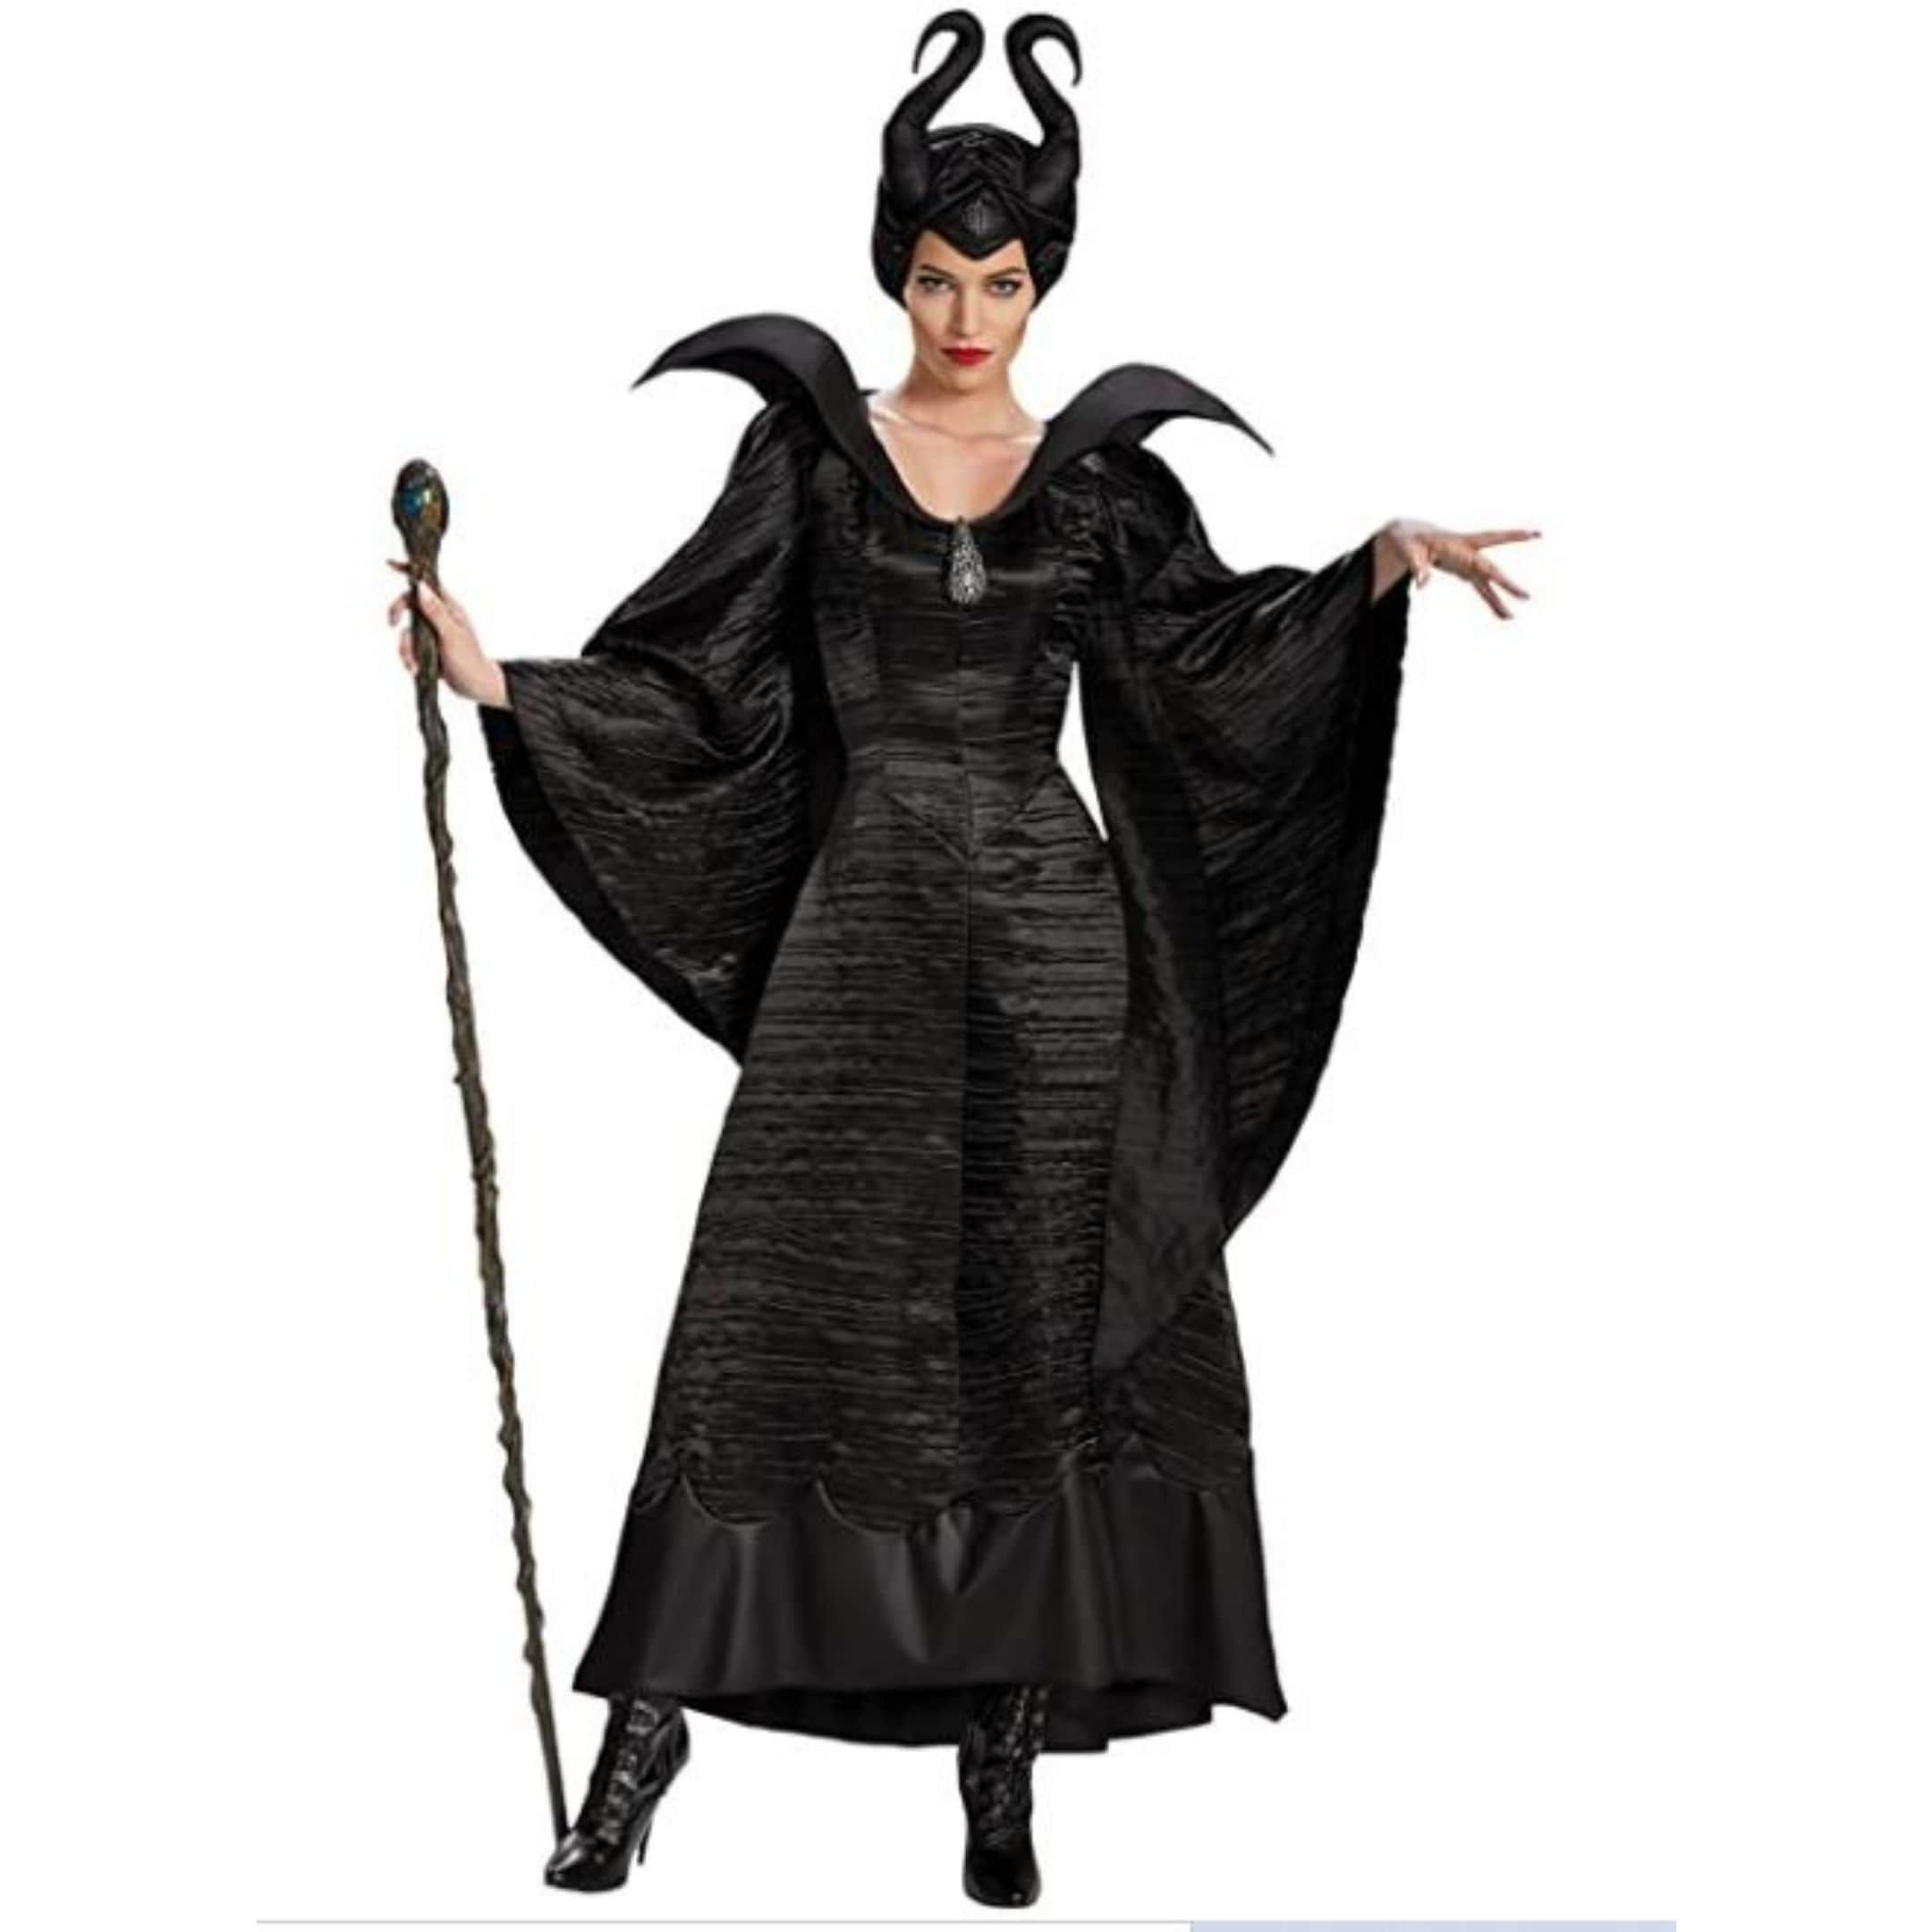 Maleficent Christening Gown Costume